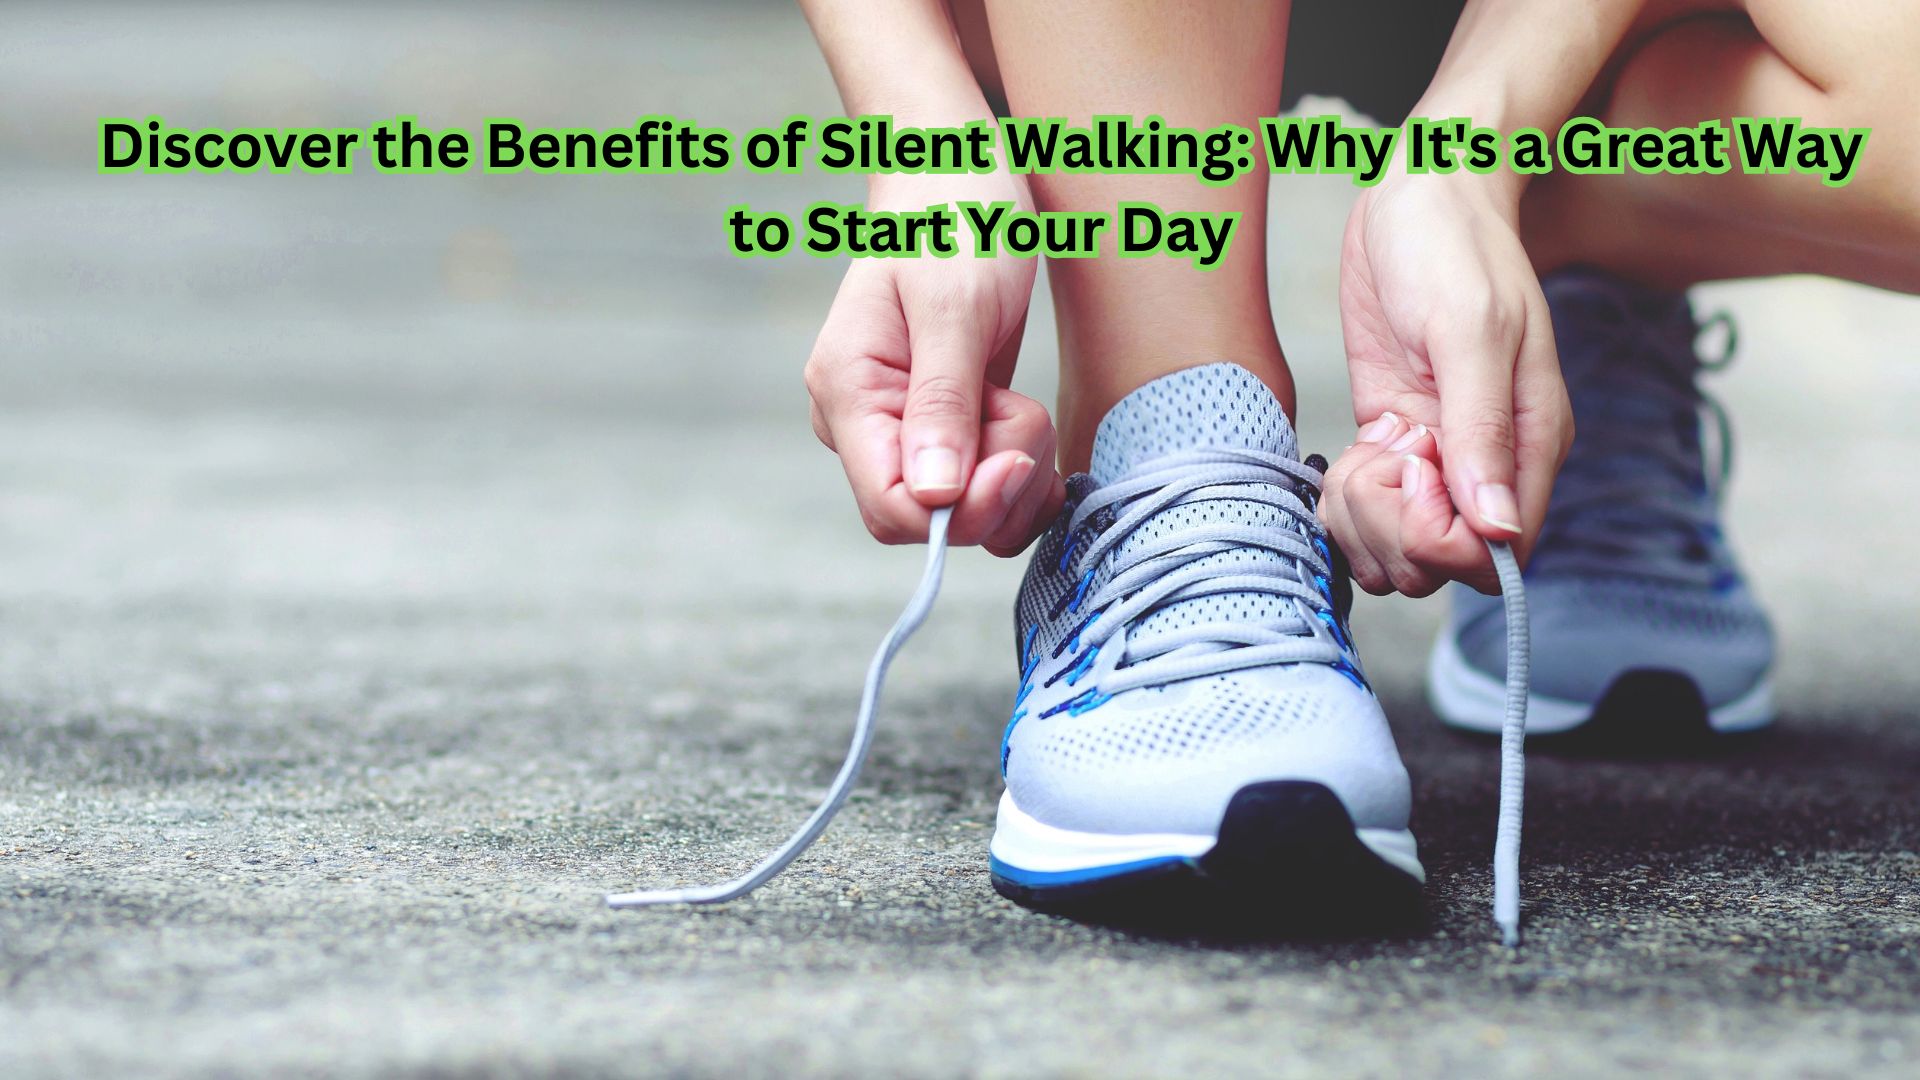 Discover the Benefits of Silent Walking: Why It's a Great Way to Start Your Day